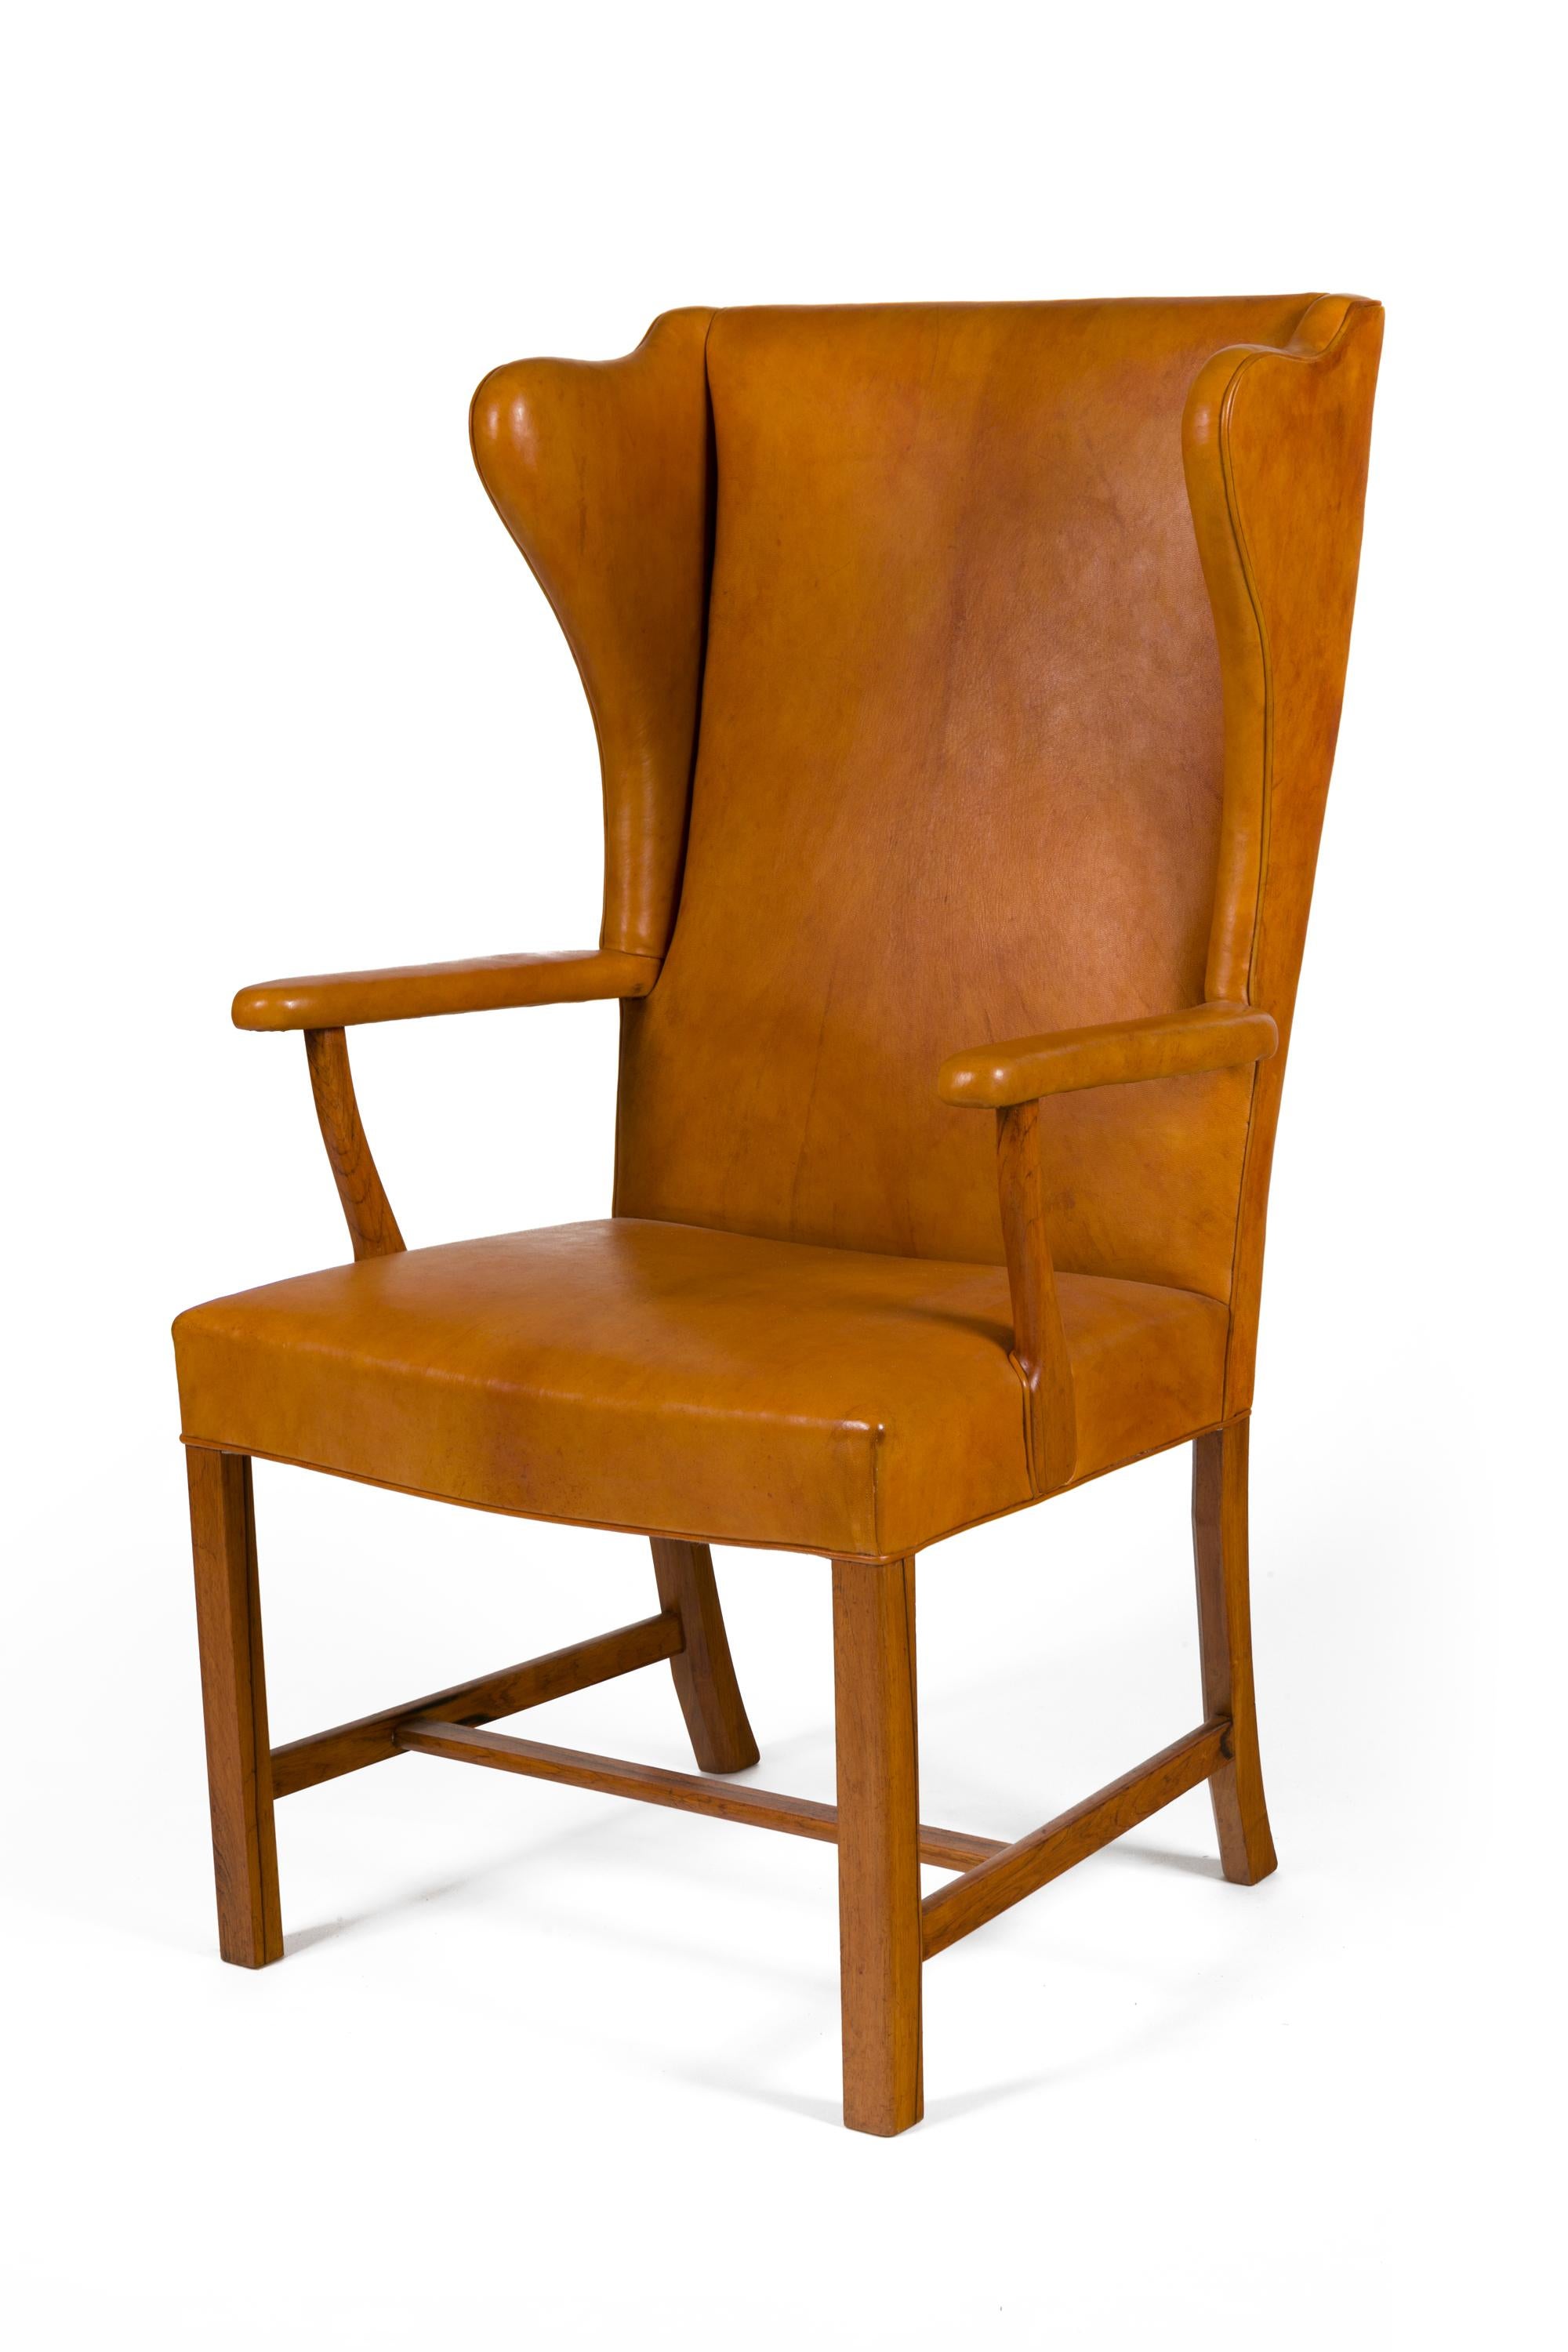 An extraordinarily rare and wonderful chair. Although similar in design to many of his wing chairs this chair has open arms that create a particularly graceful effect.